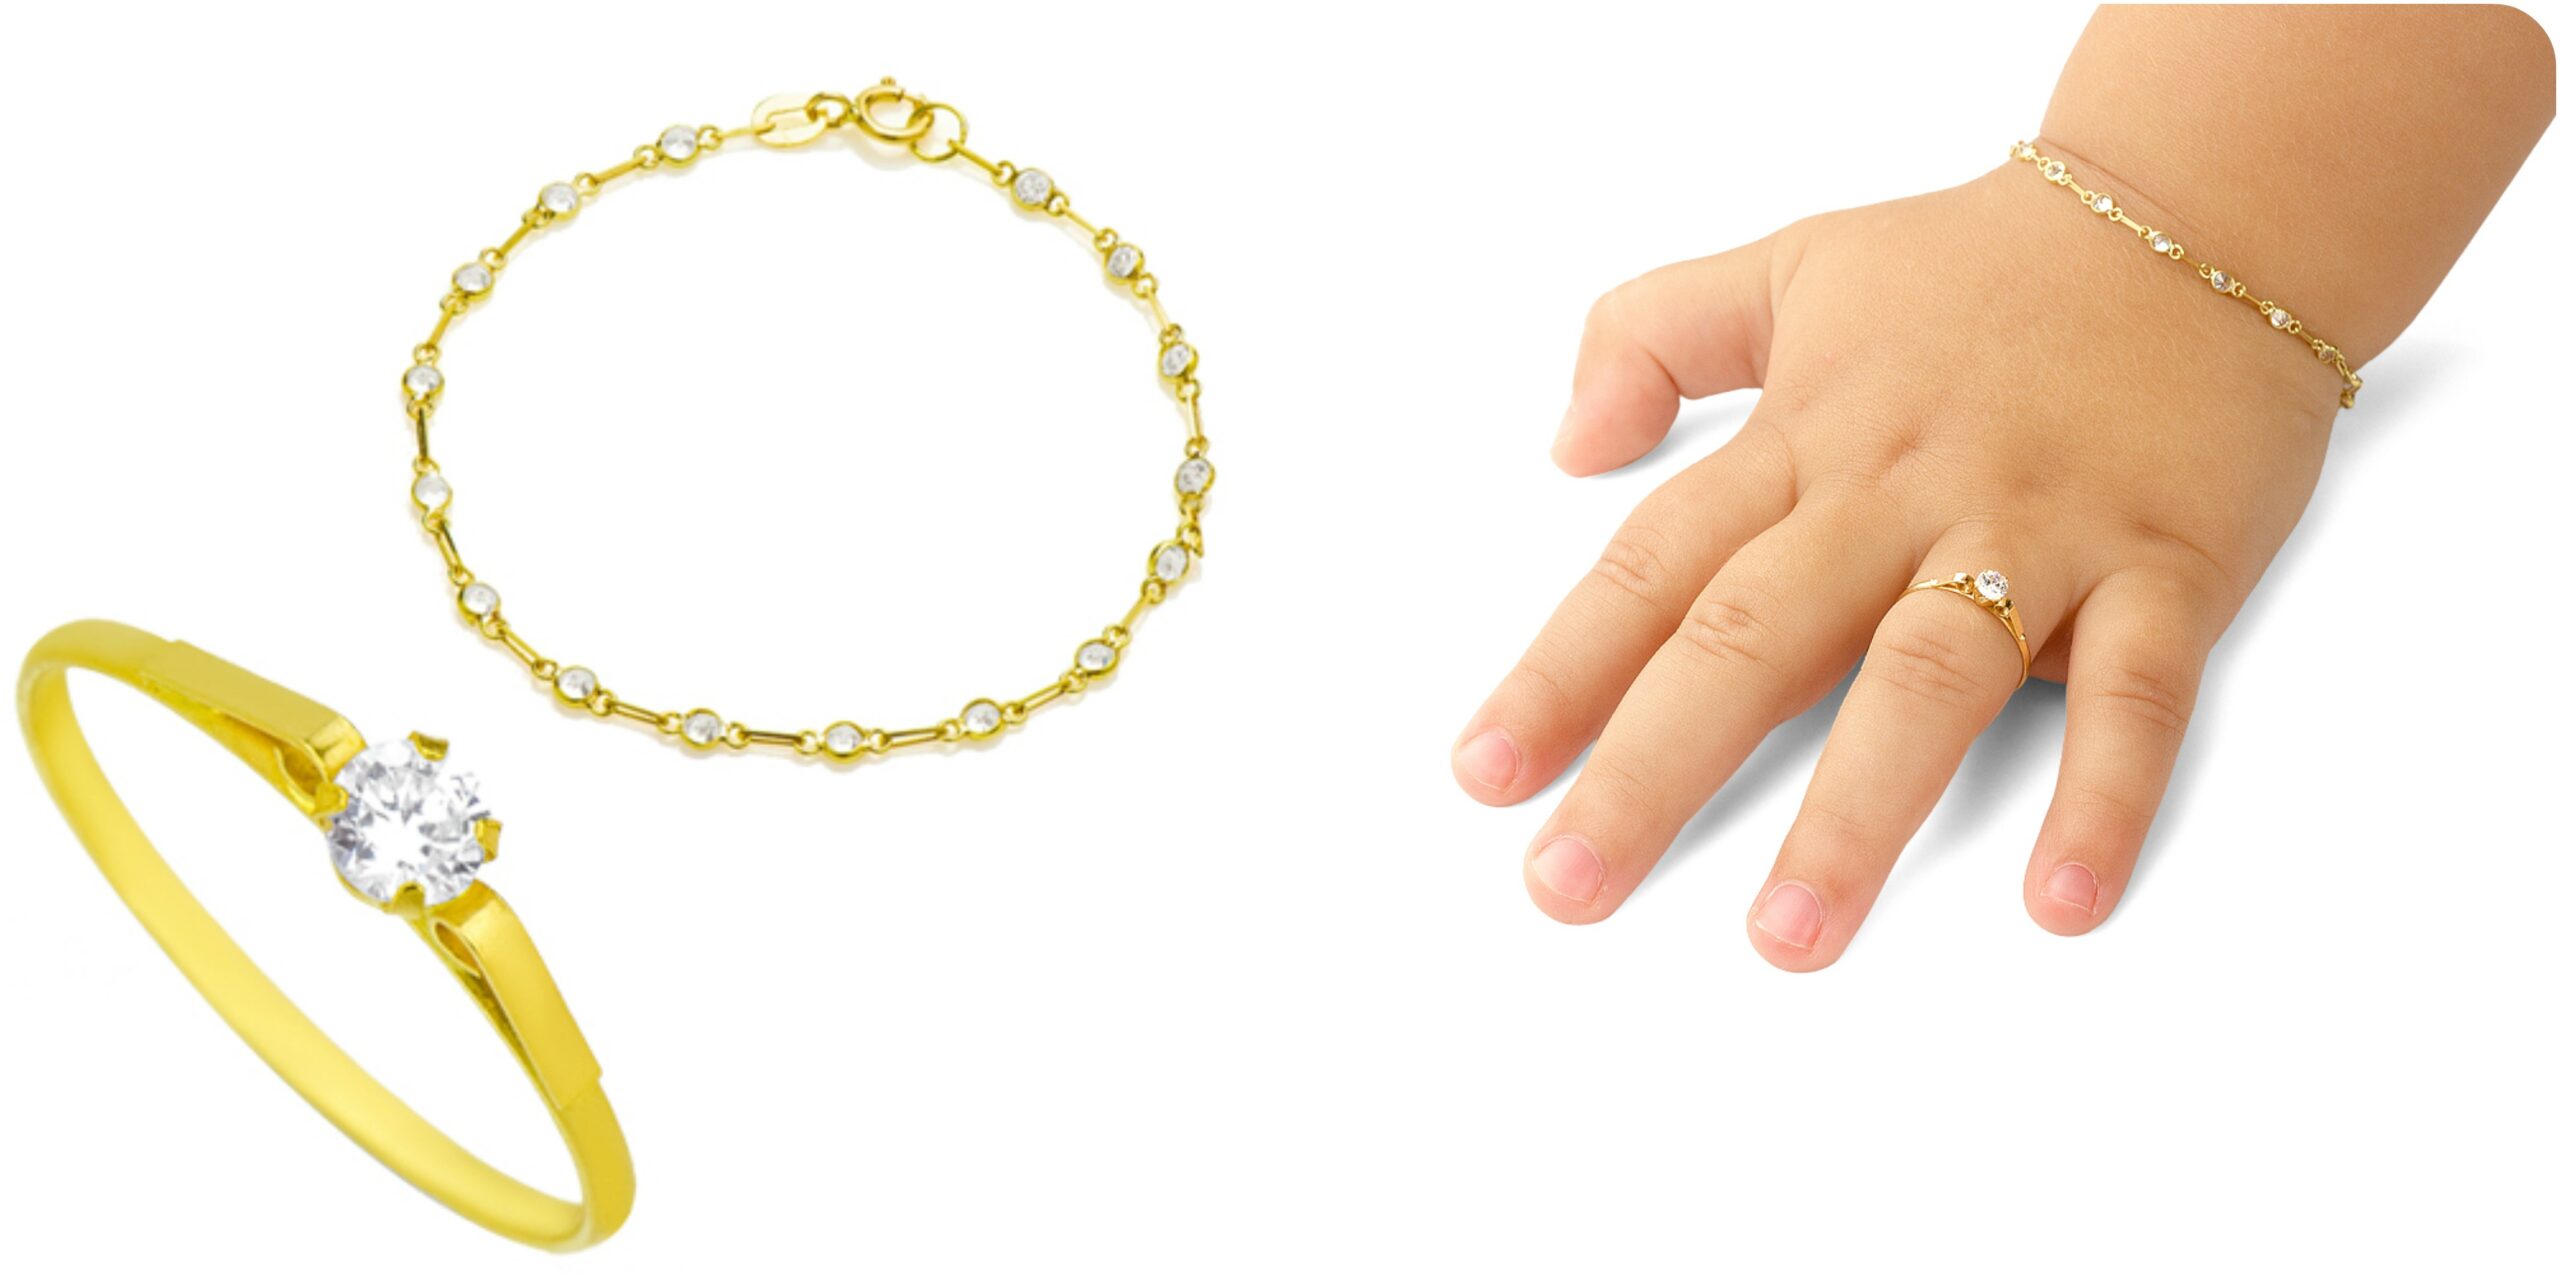 pulseira-anel-ouro-infantil-joiasgold